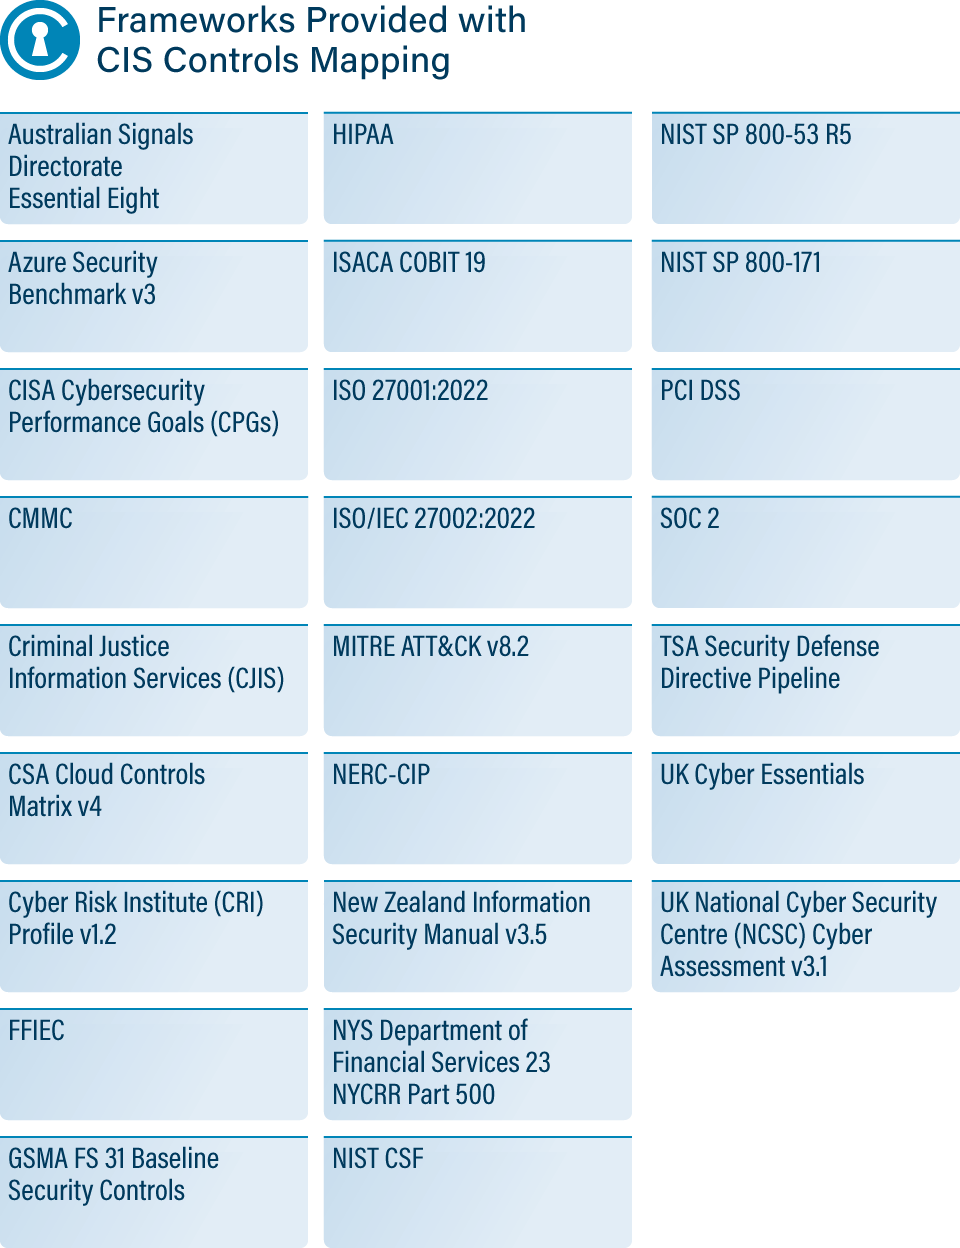 Table describing frameworks provided with CIS Controls Mapping